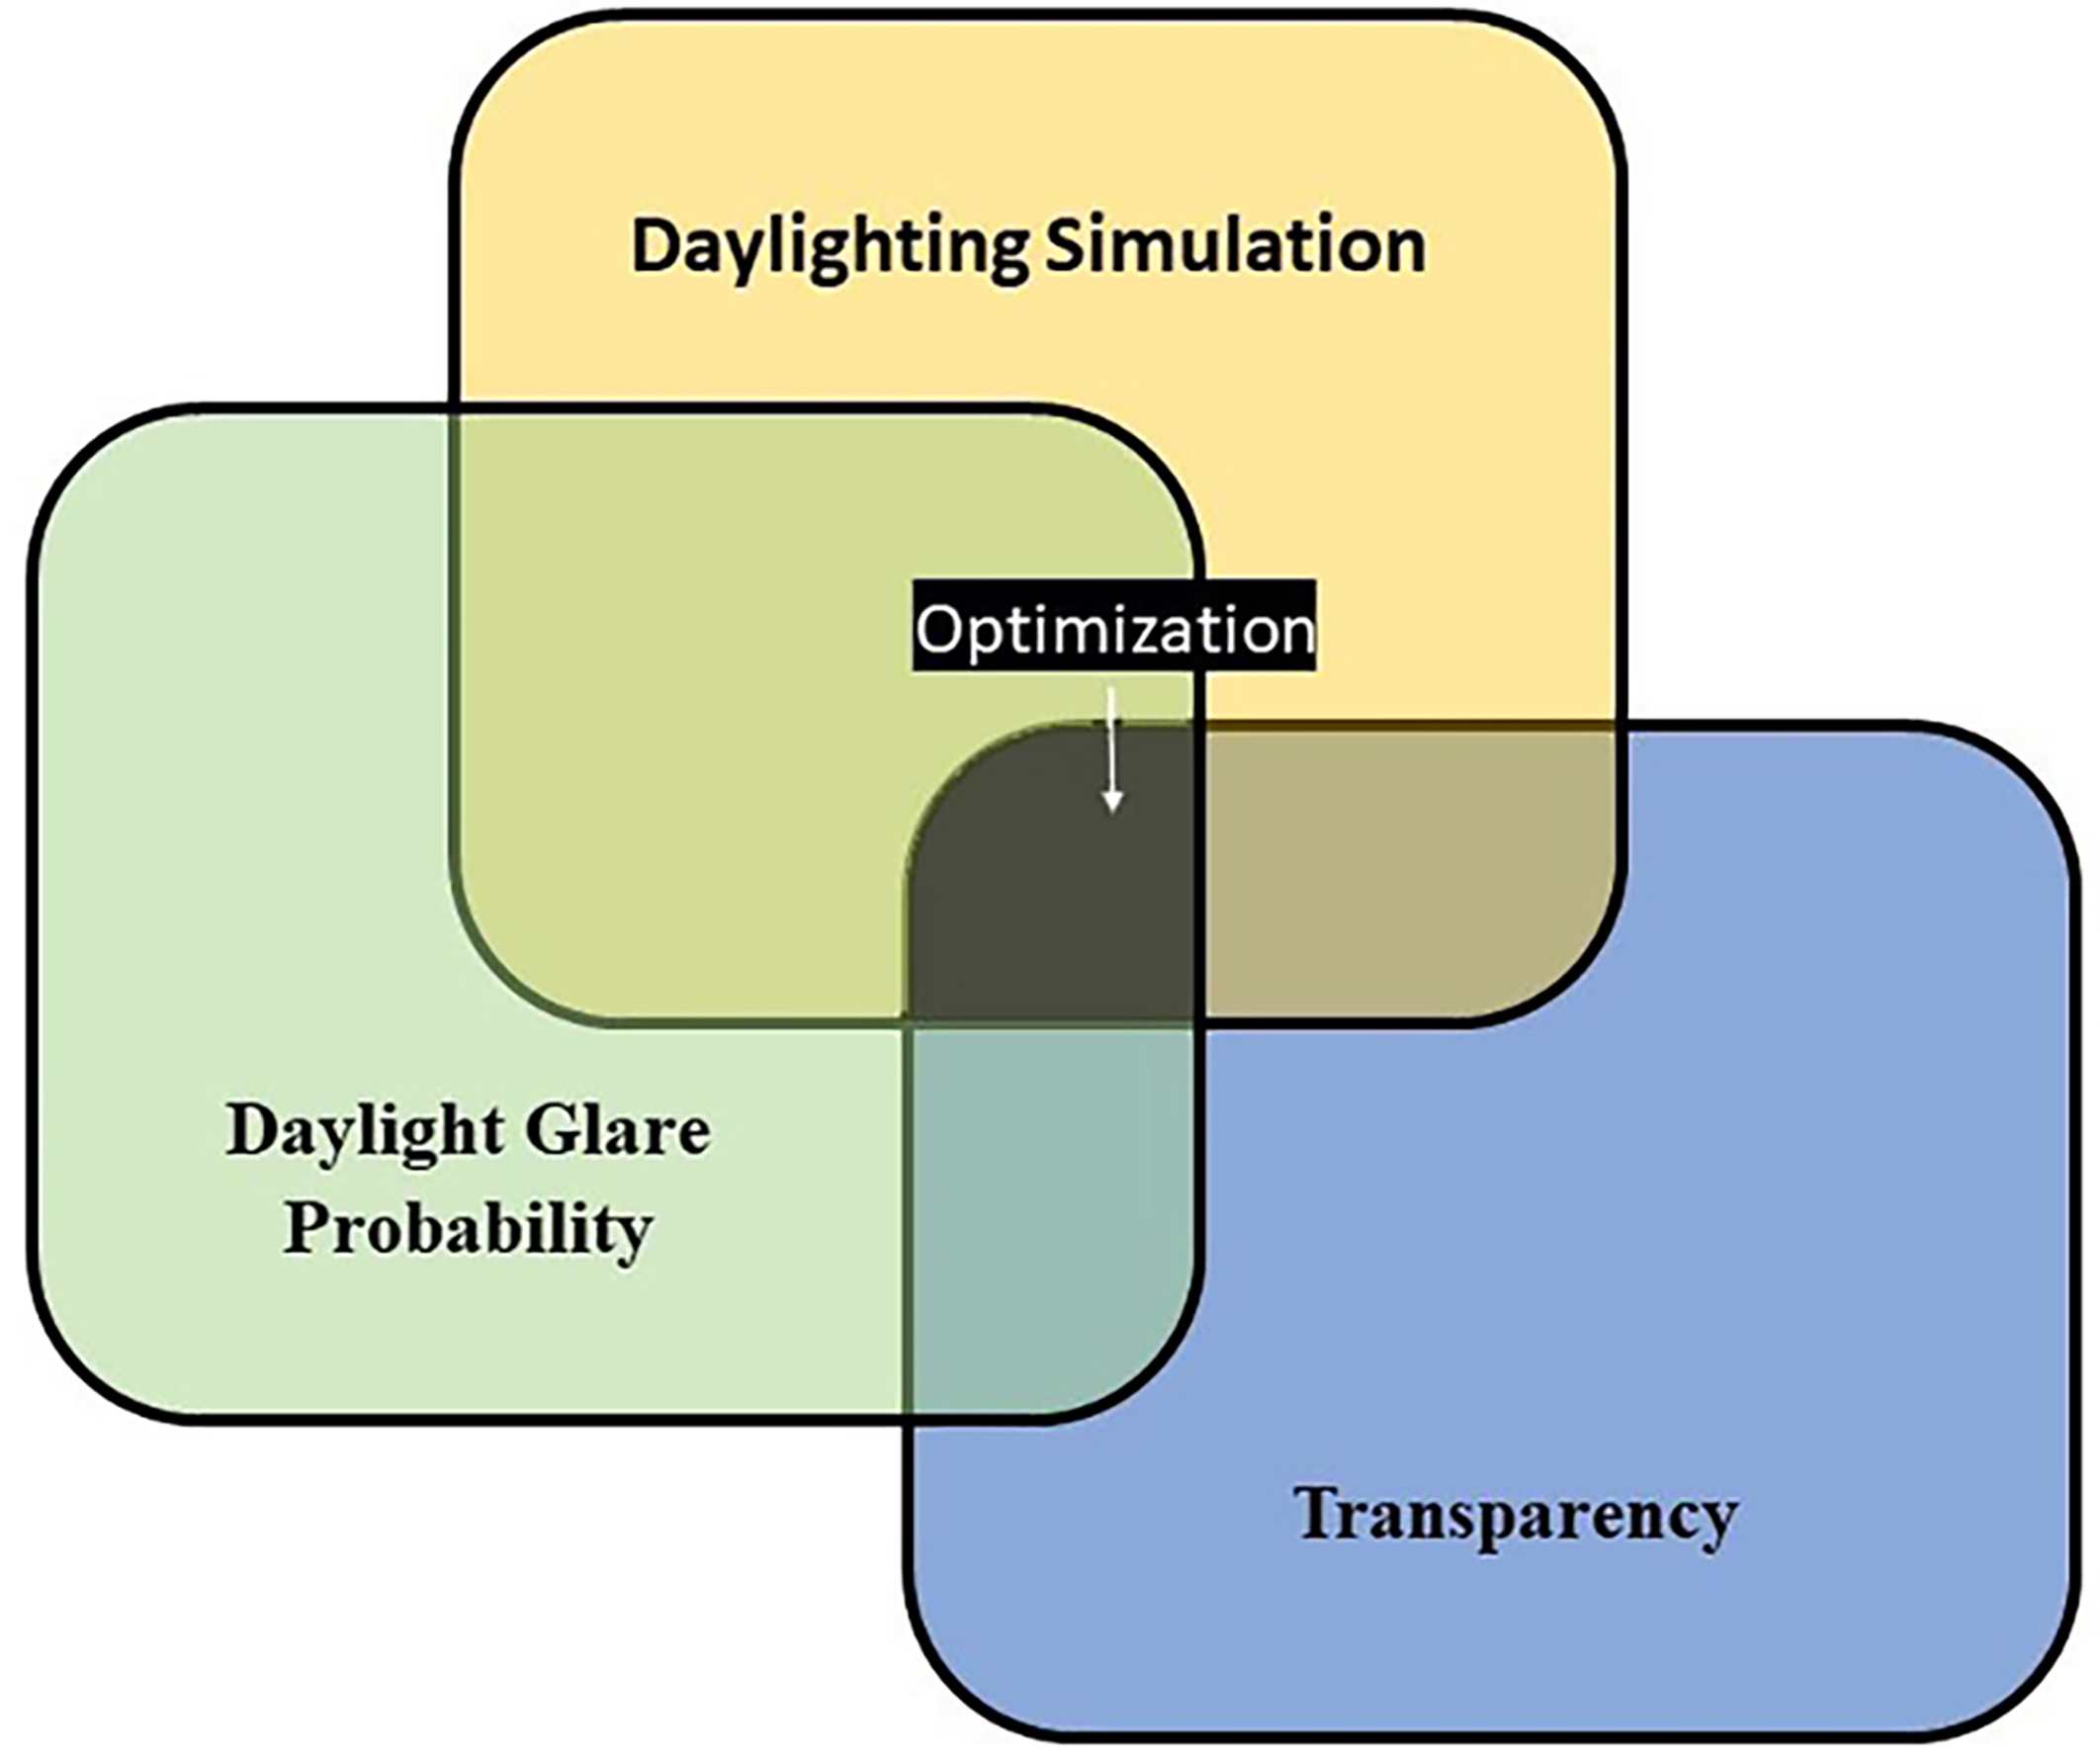 The best type of Moshabak is achieved by combining the results from Daylighting Simulation, Daylight Glare Probability and Transparency analysis.